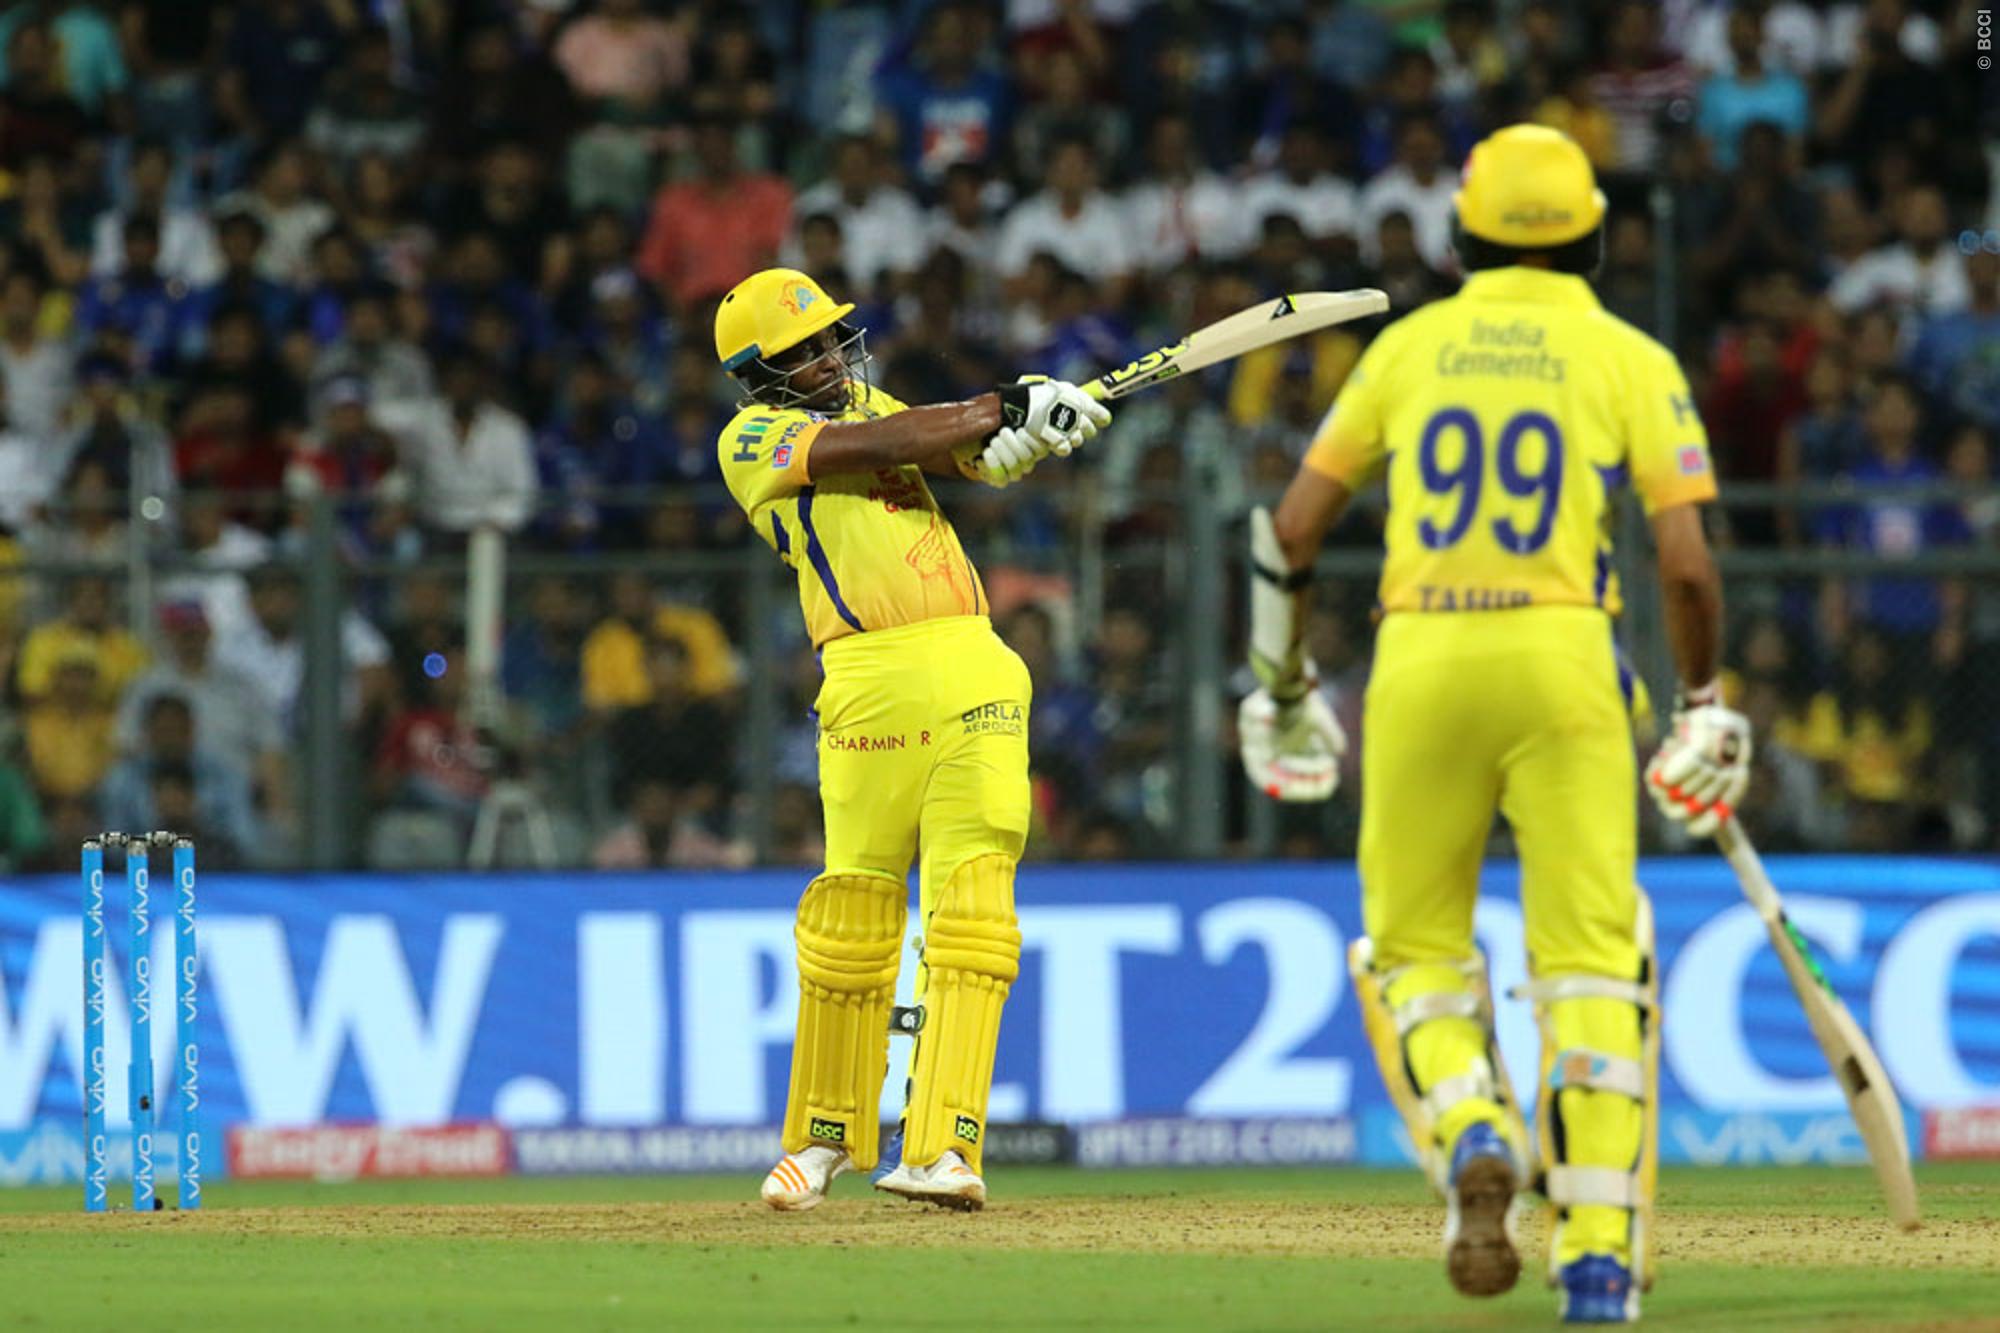 IPL 2018 | Dwayne Bravo special gives Chennai Super Kings thrilling win in tournament opener